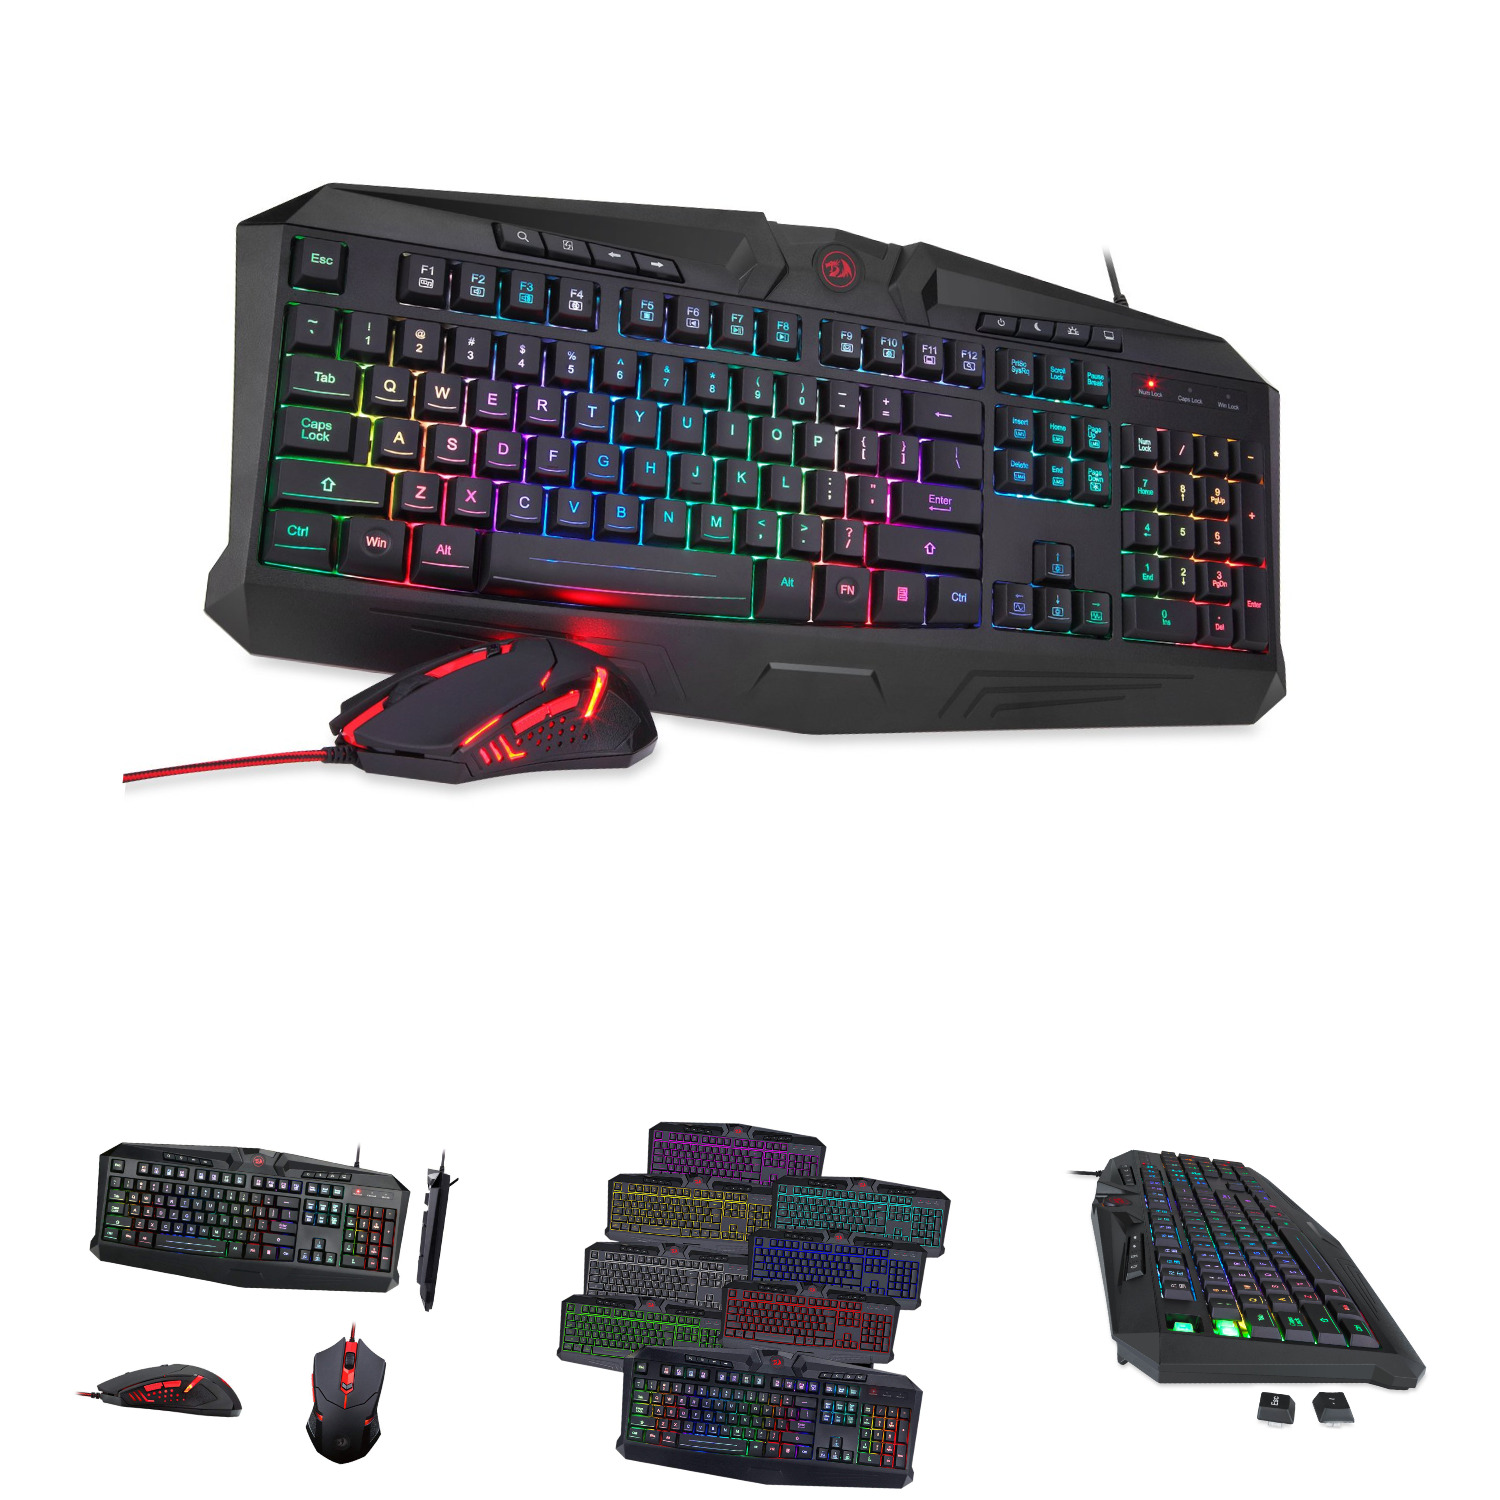 Redragon S101 Gaming Keyboard Mouse Combo, RGB LED Backlit 104 Keys USB Wired...